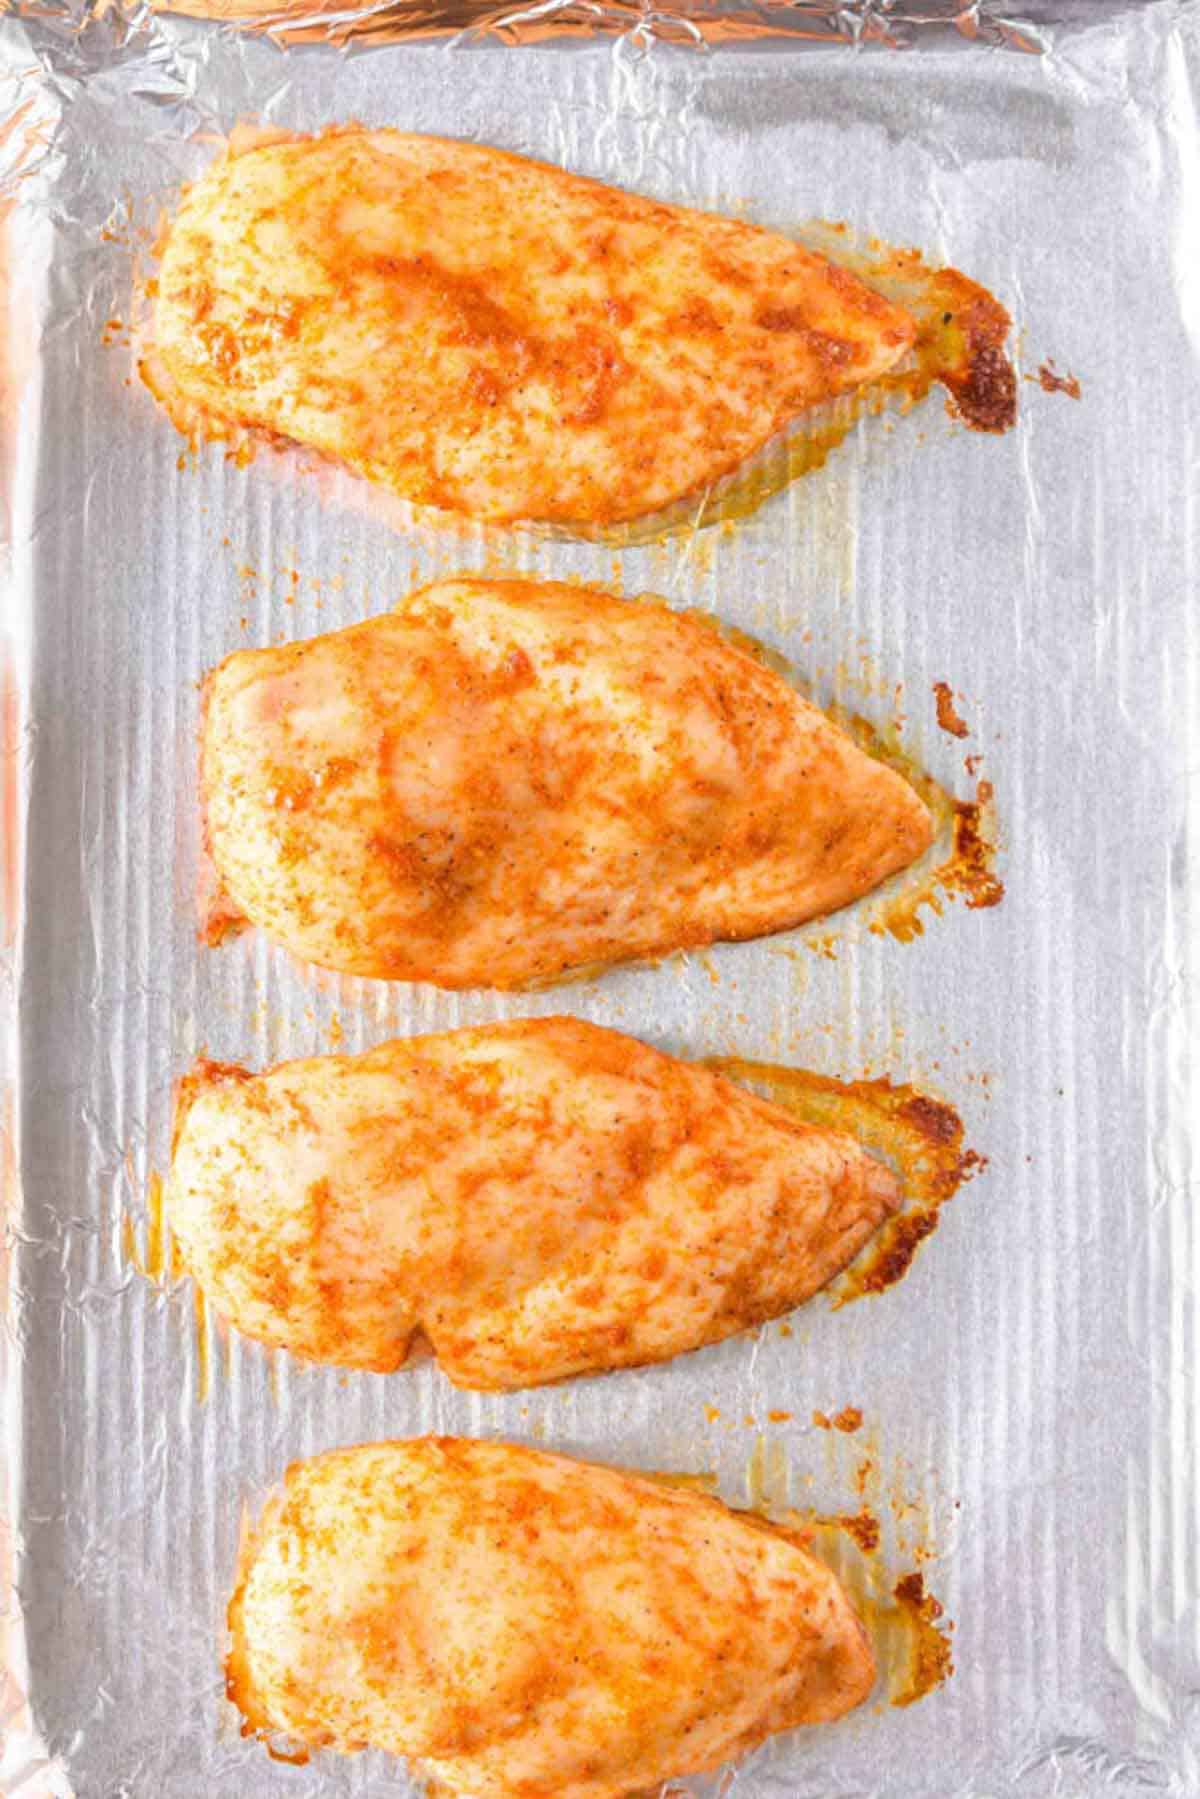 Cooked chicken breasts  on a baking sheet.